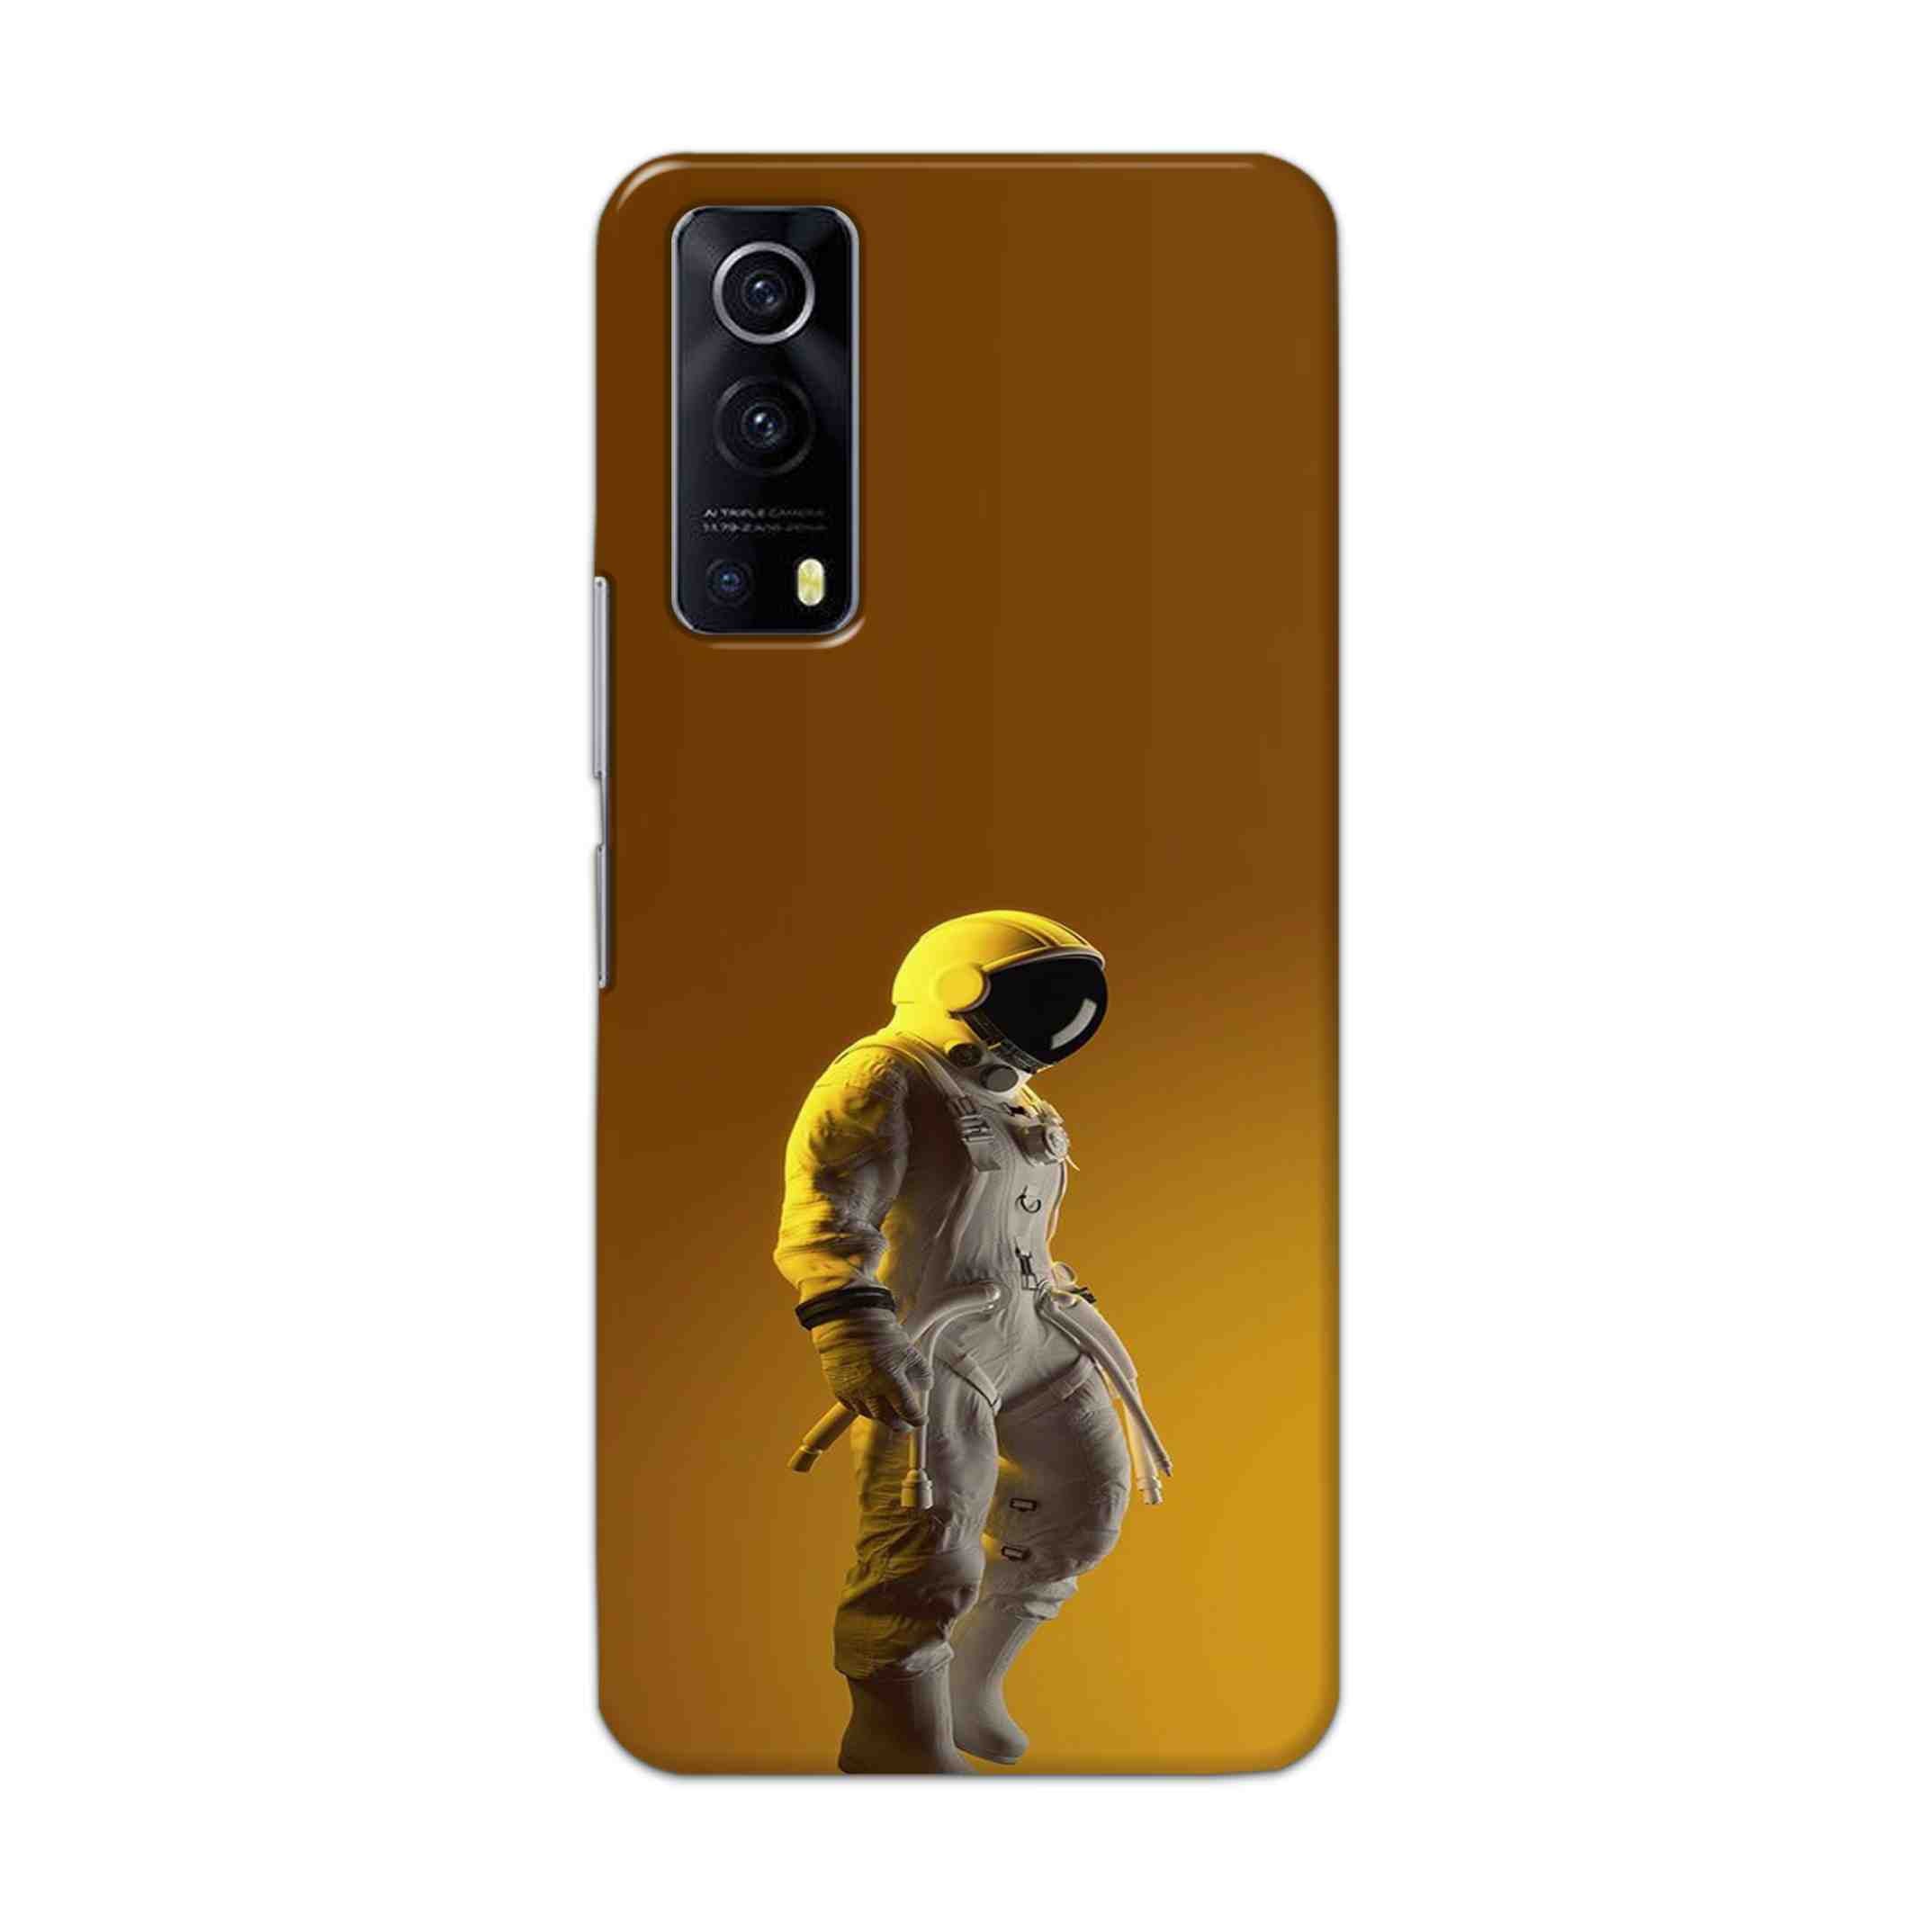 Buy Yellow Astronaut Hard Back Mobile Phone Case Cover For Vivo IQOO Z3 Online